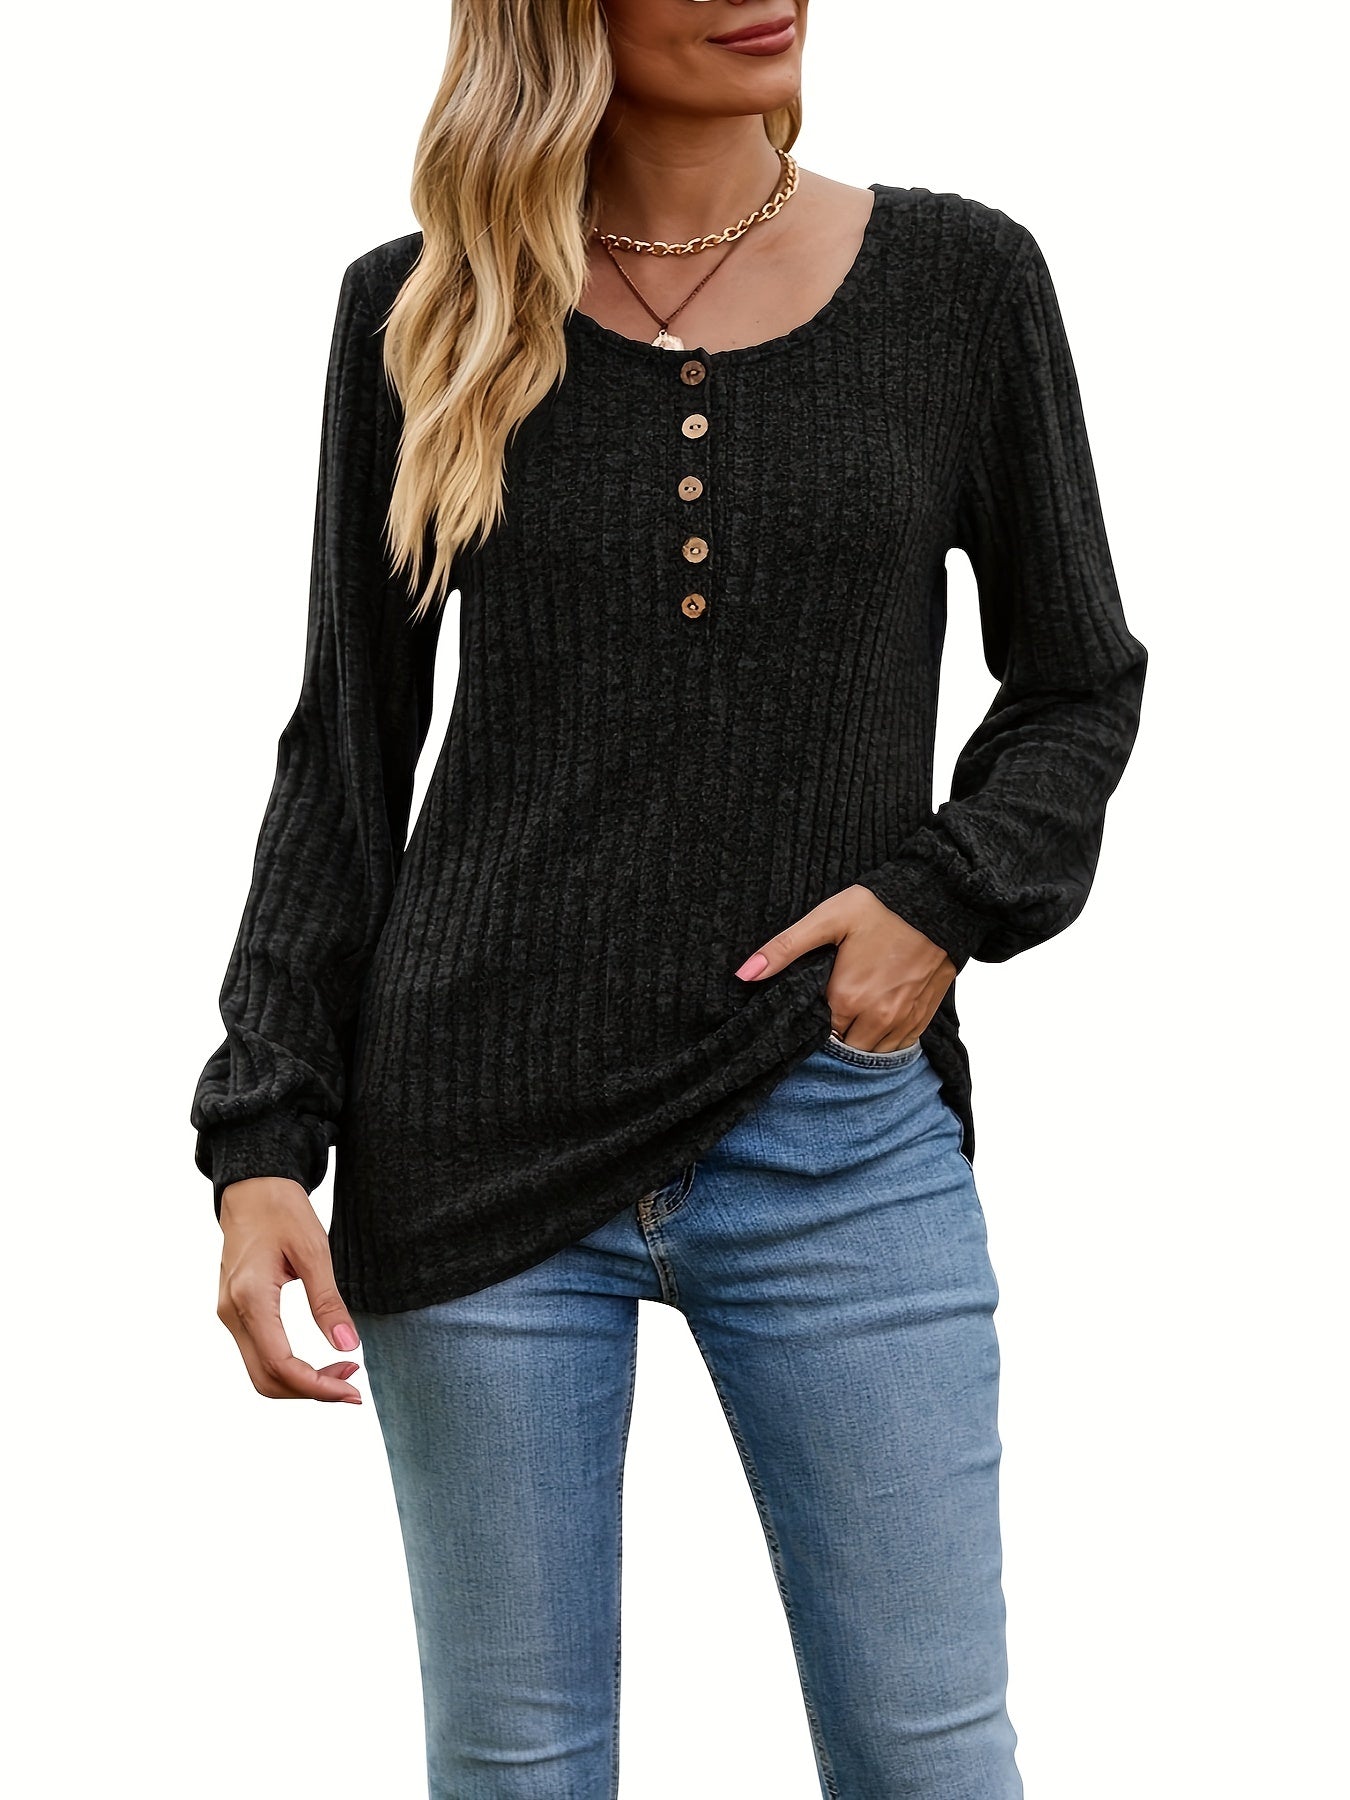 Antmvs Ribbed Button Front T-Shirt, Casual Long Sleeve Top For Spring & Fall, Women's Clothing